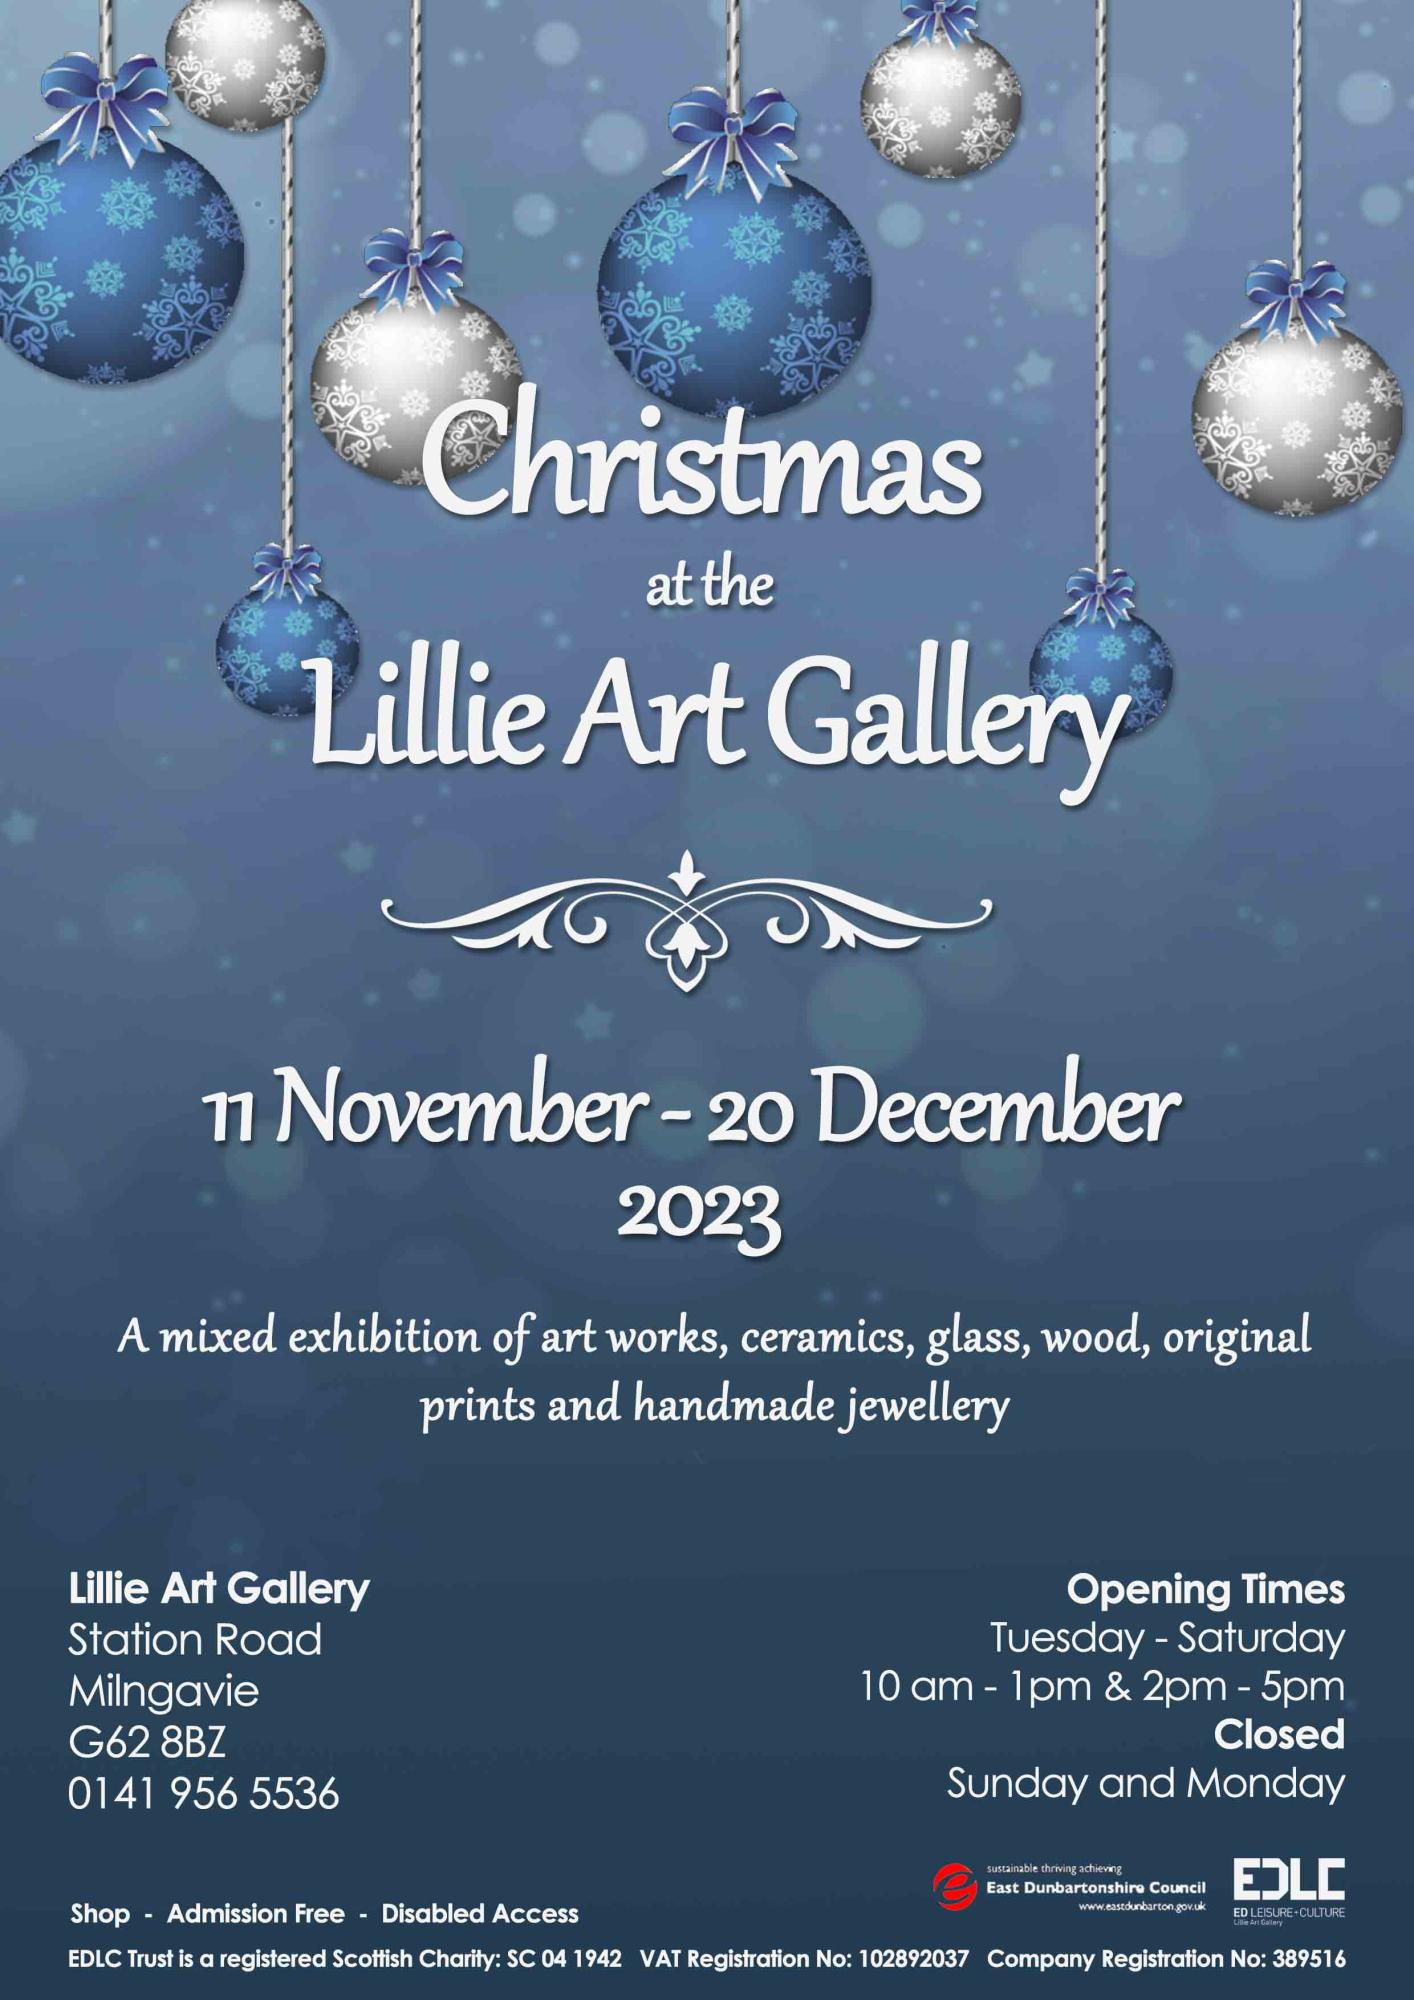 Poster for Christmas at the Lillie Art Gallery - same info as text